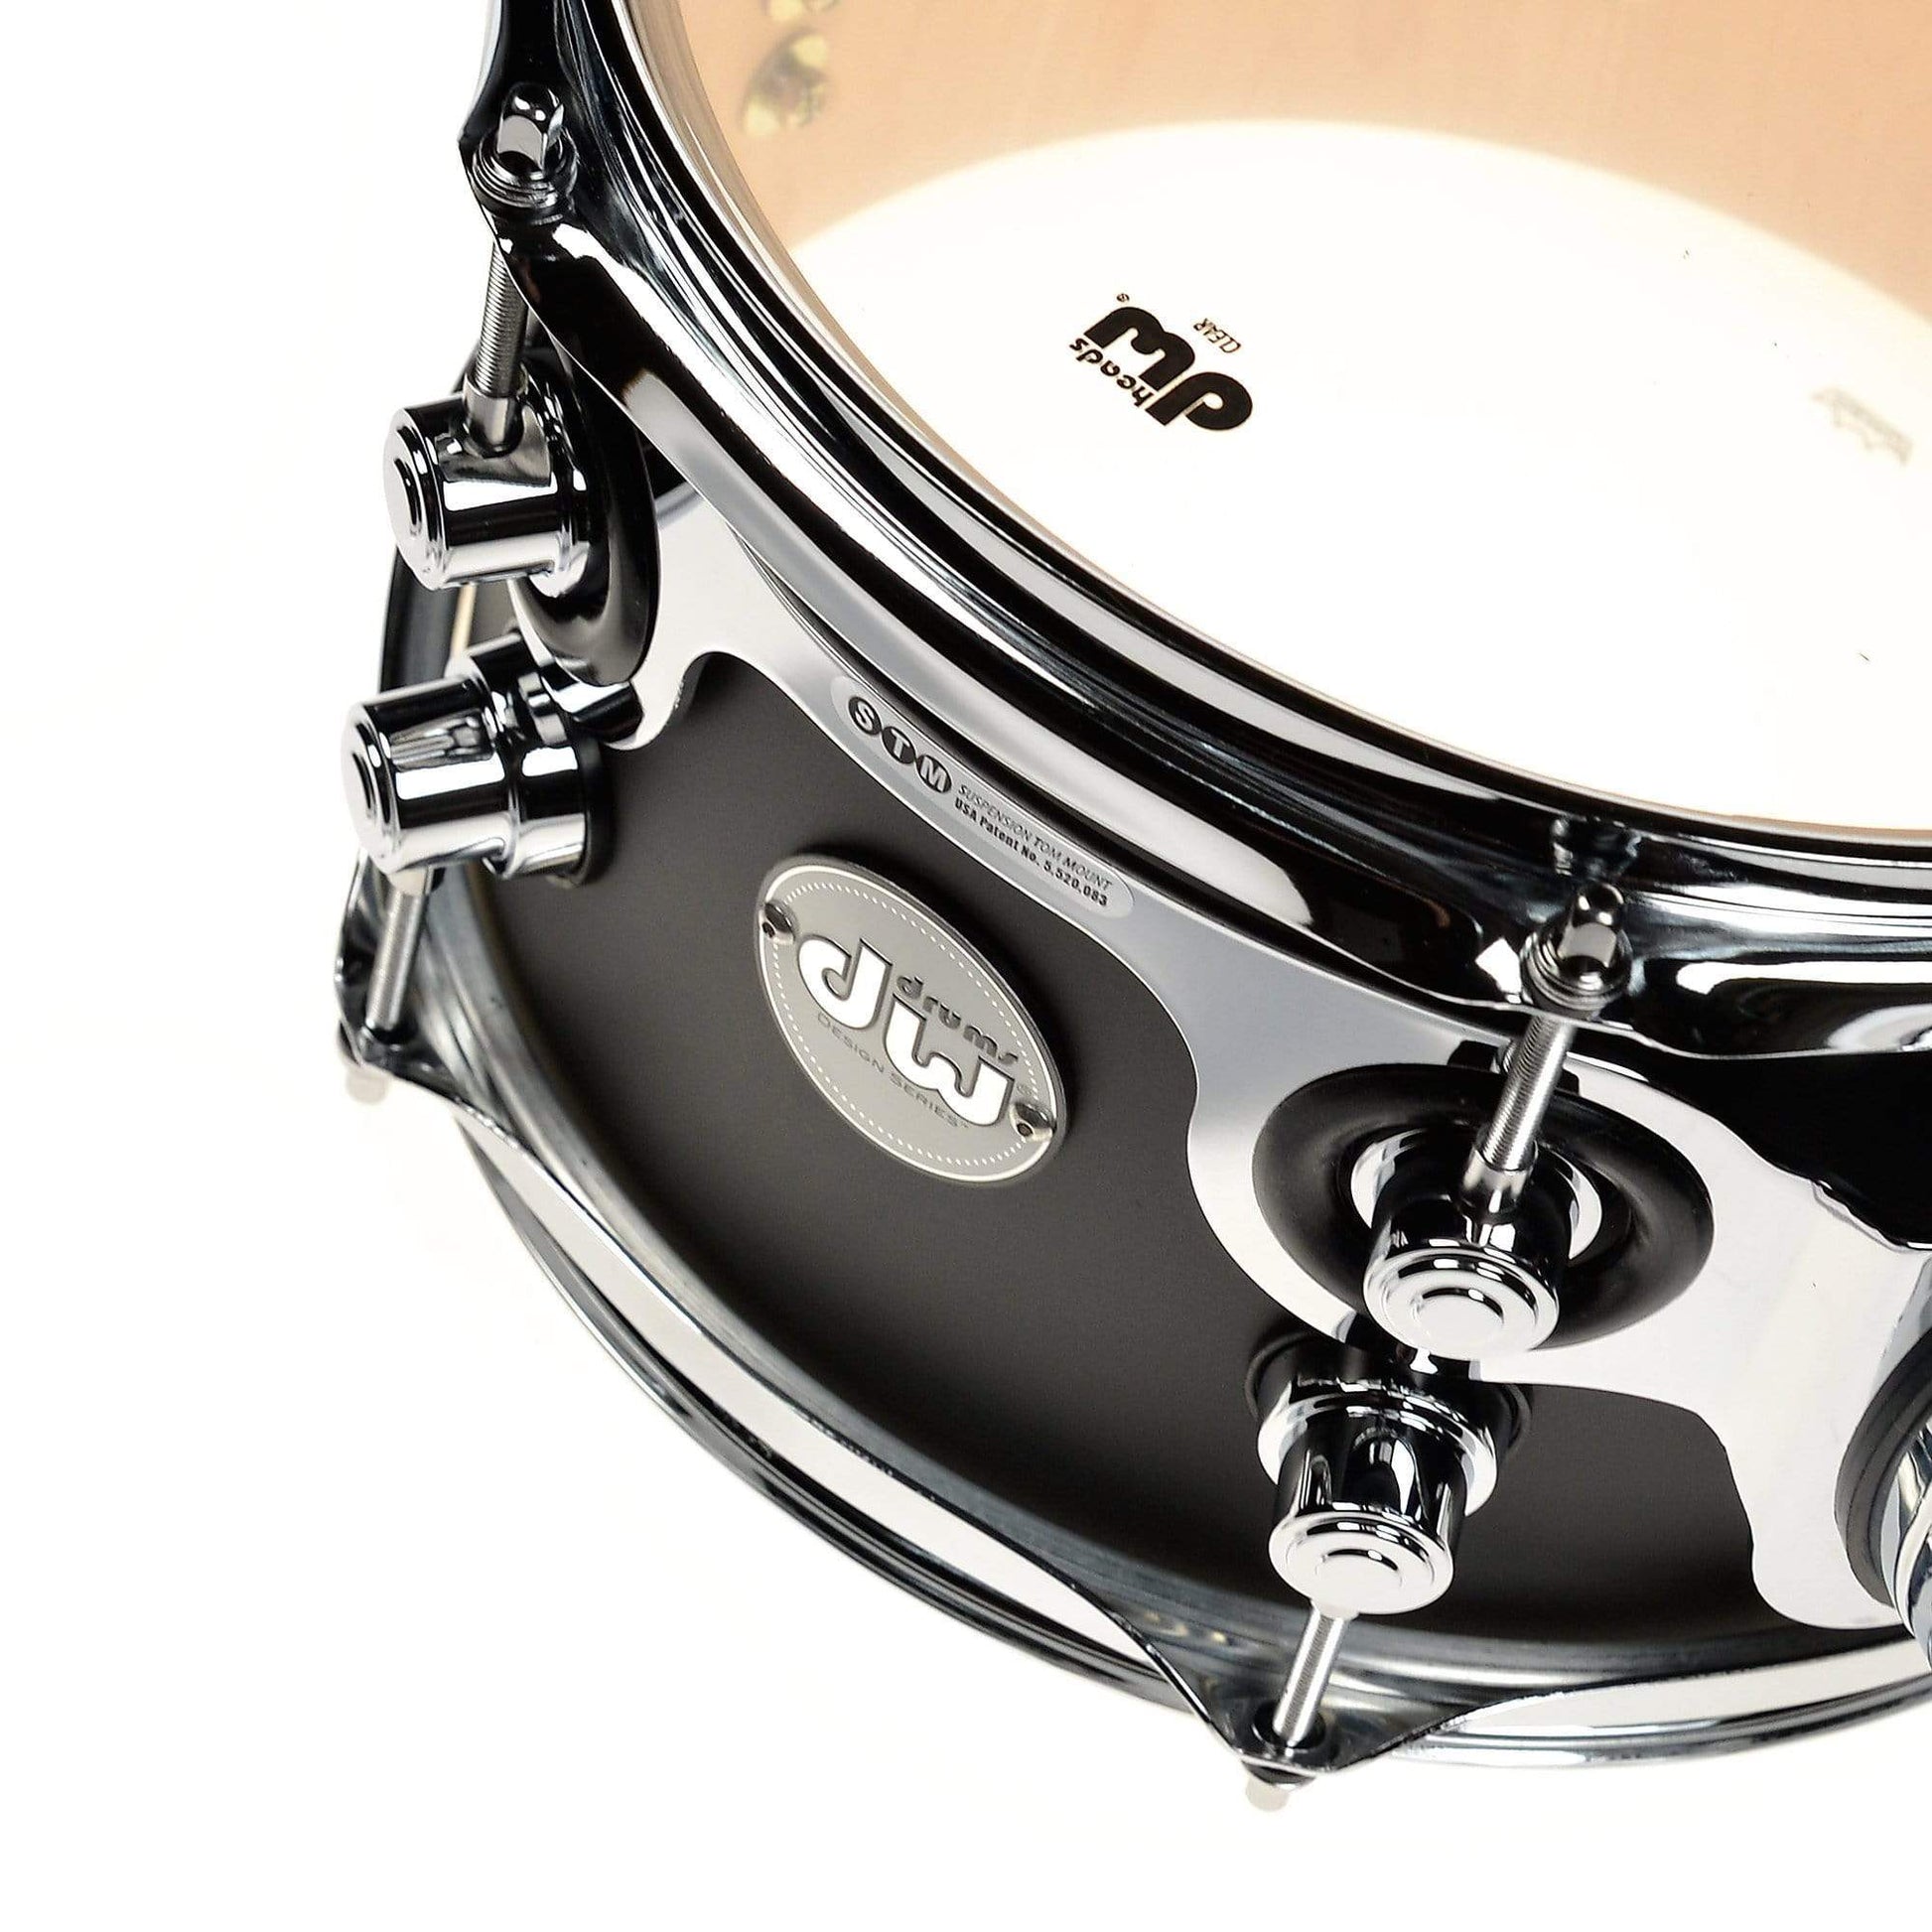 DW 7x10 Design Satin Black Tom Chrome Hardware Drums and Percussion / Acoustic Drums / Tom